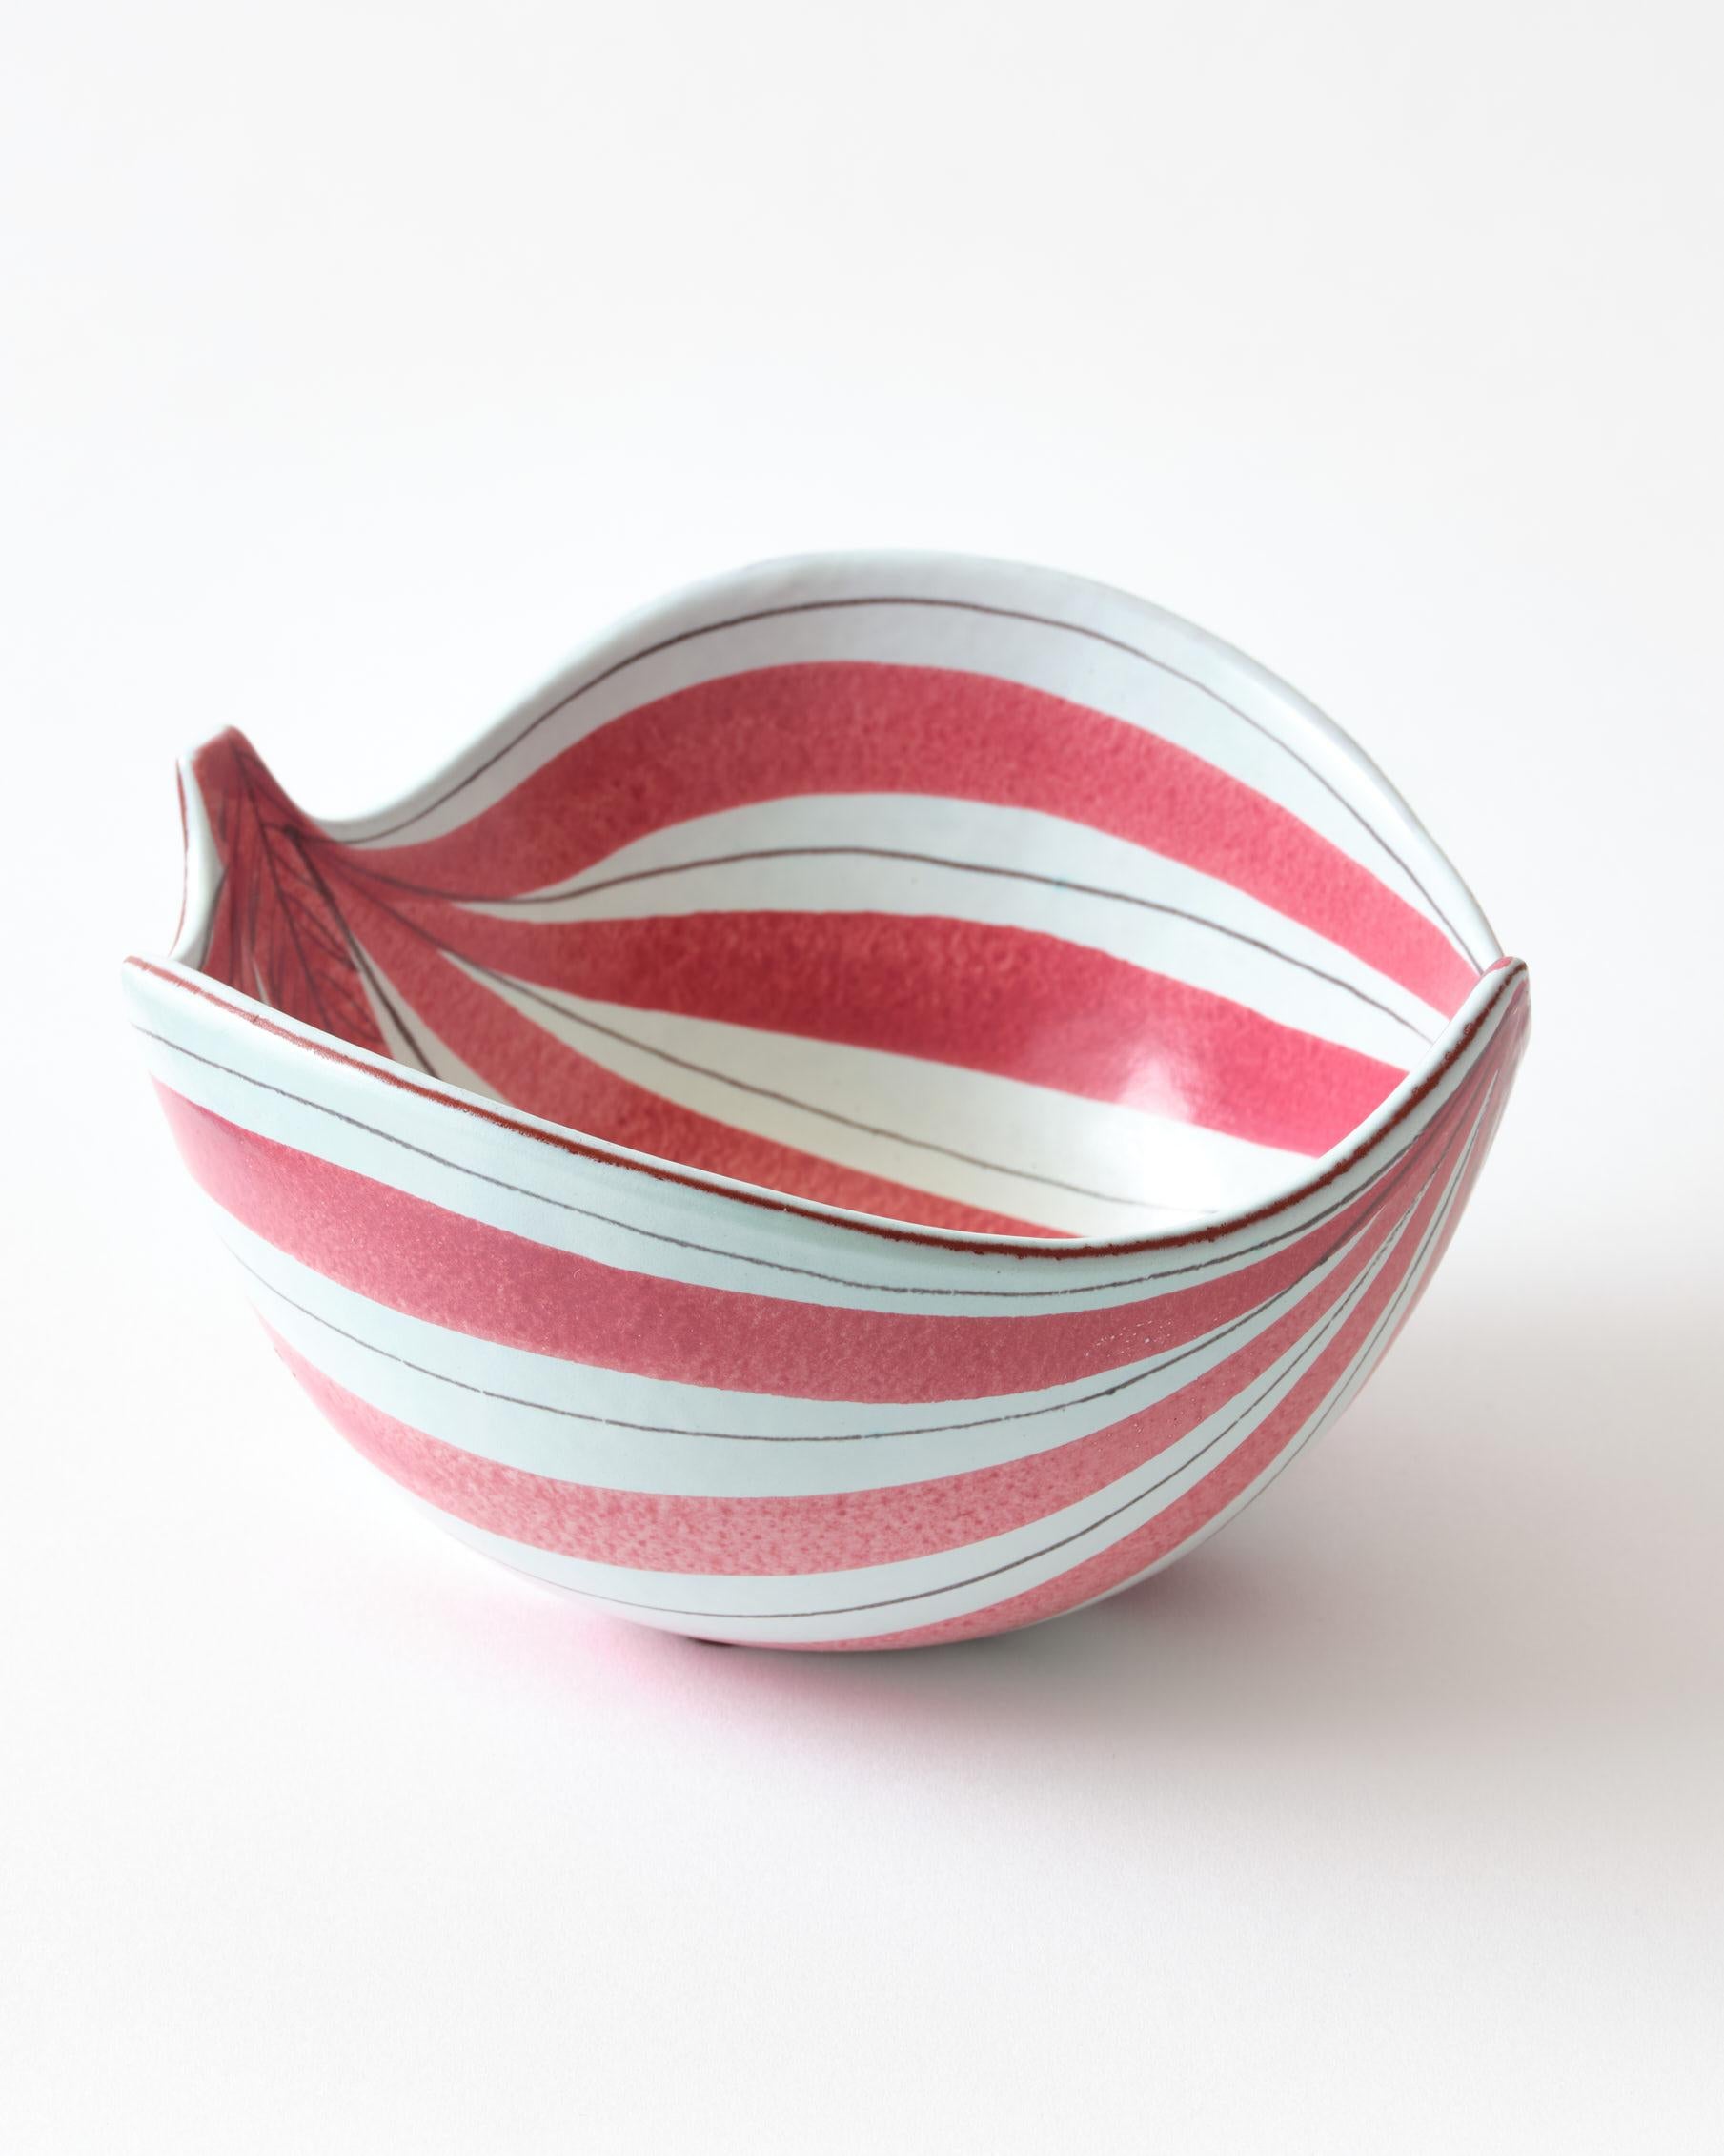 Hand-Crafted Ceramic Bowl by Stig Lindberg, Sweden, C 1950, Red & White Striped, Signed For Sale